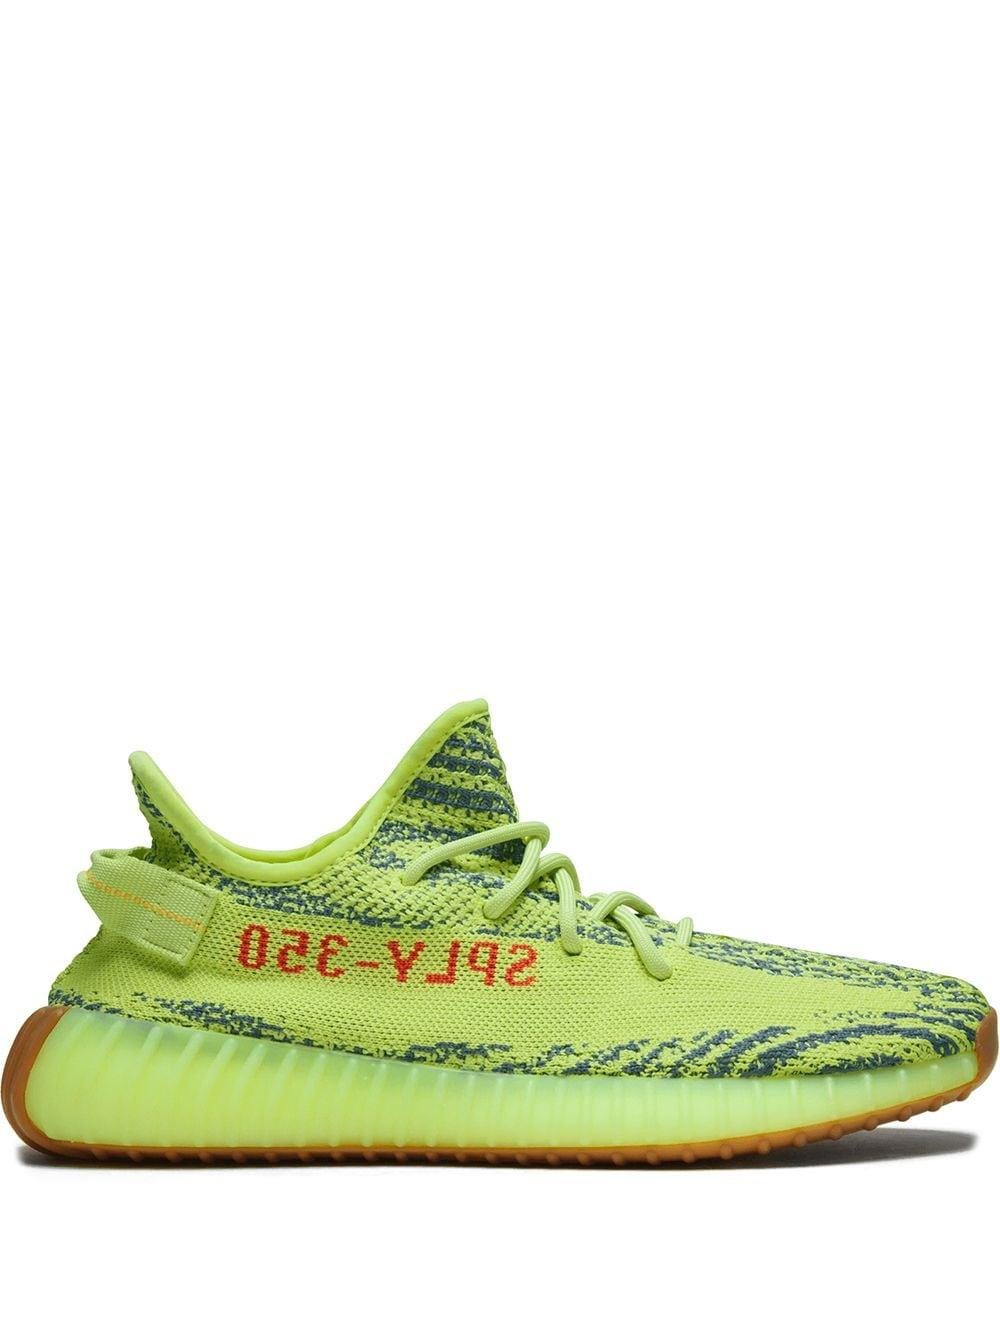 Yeezy boost 350 v2 lime green outfit